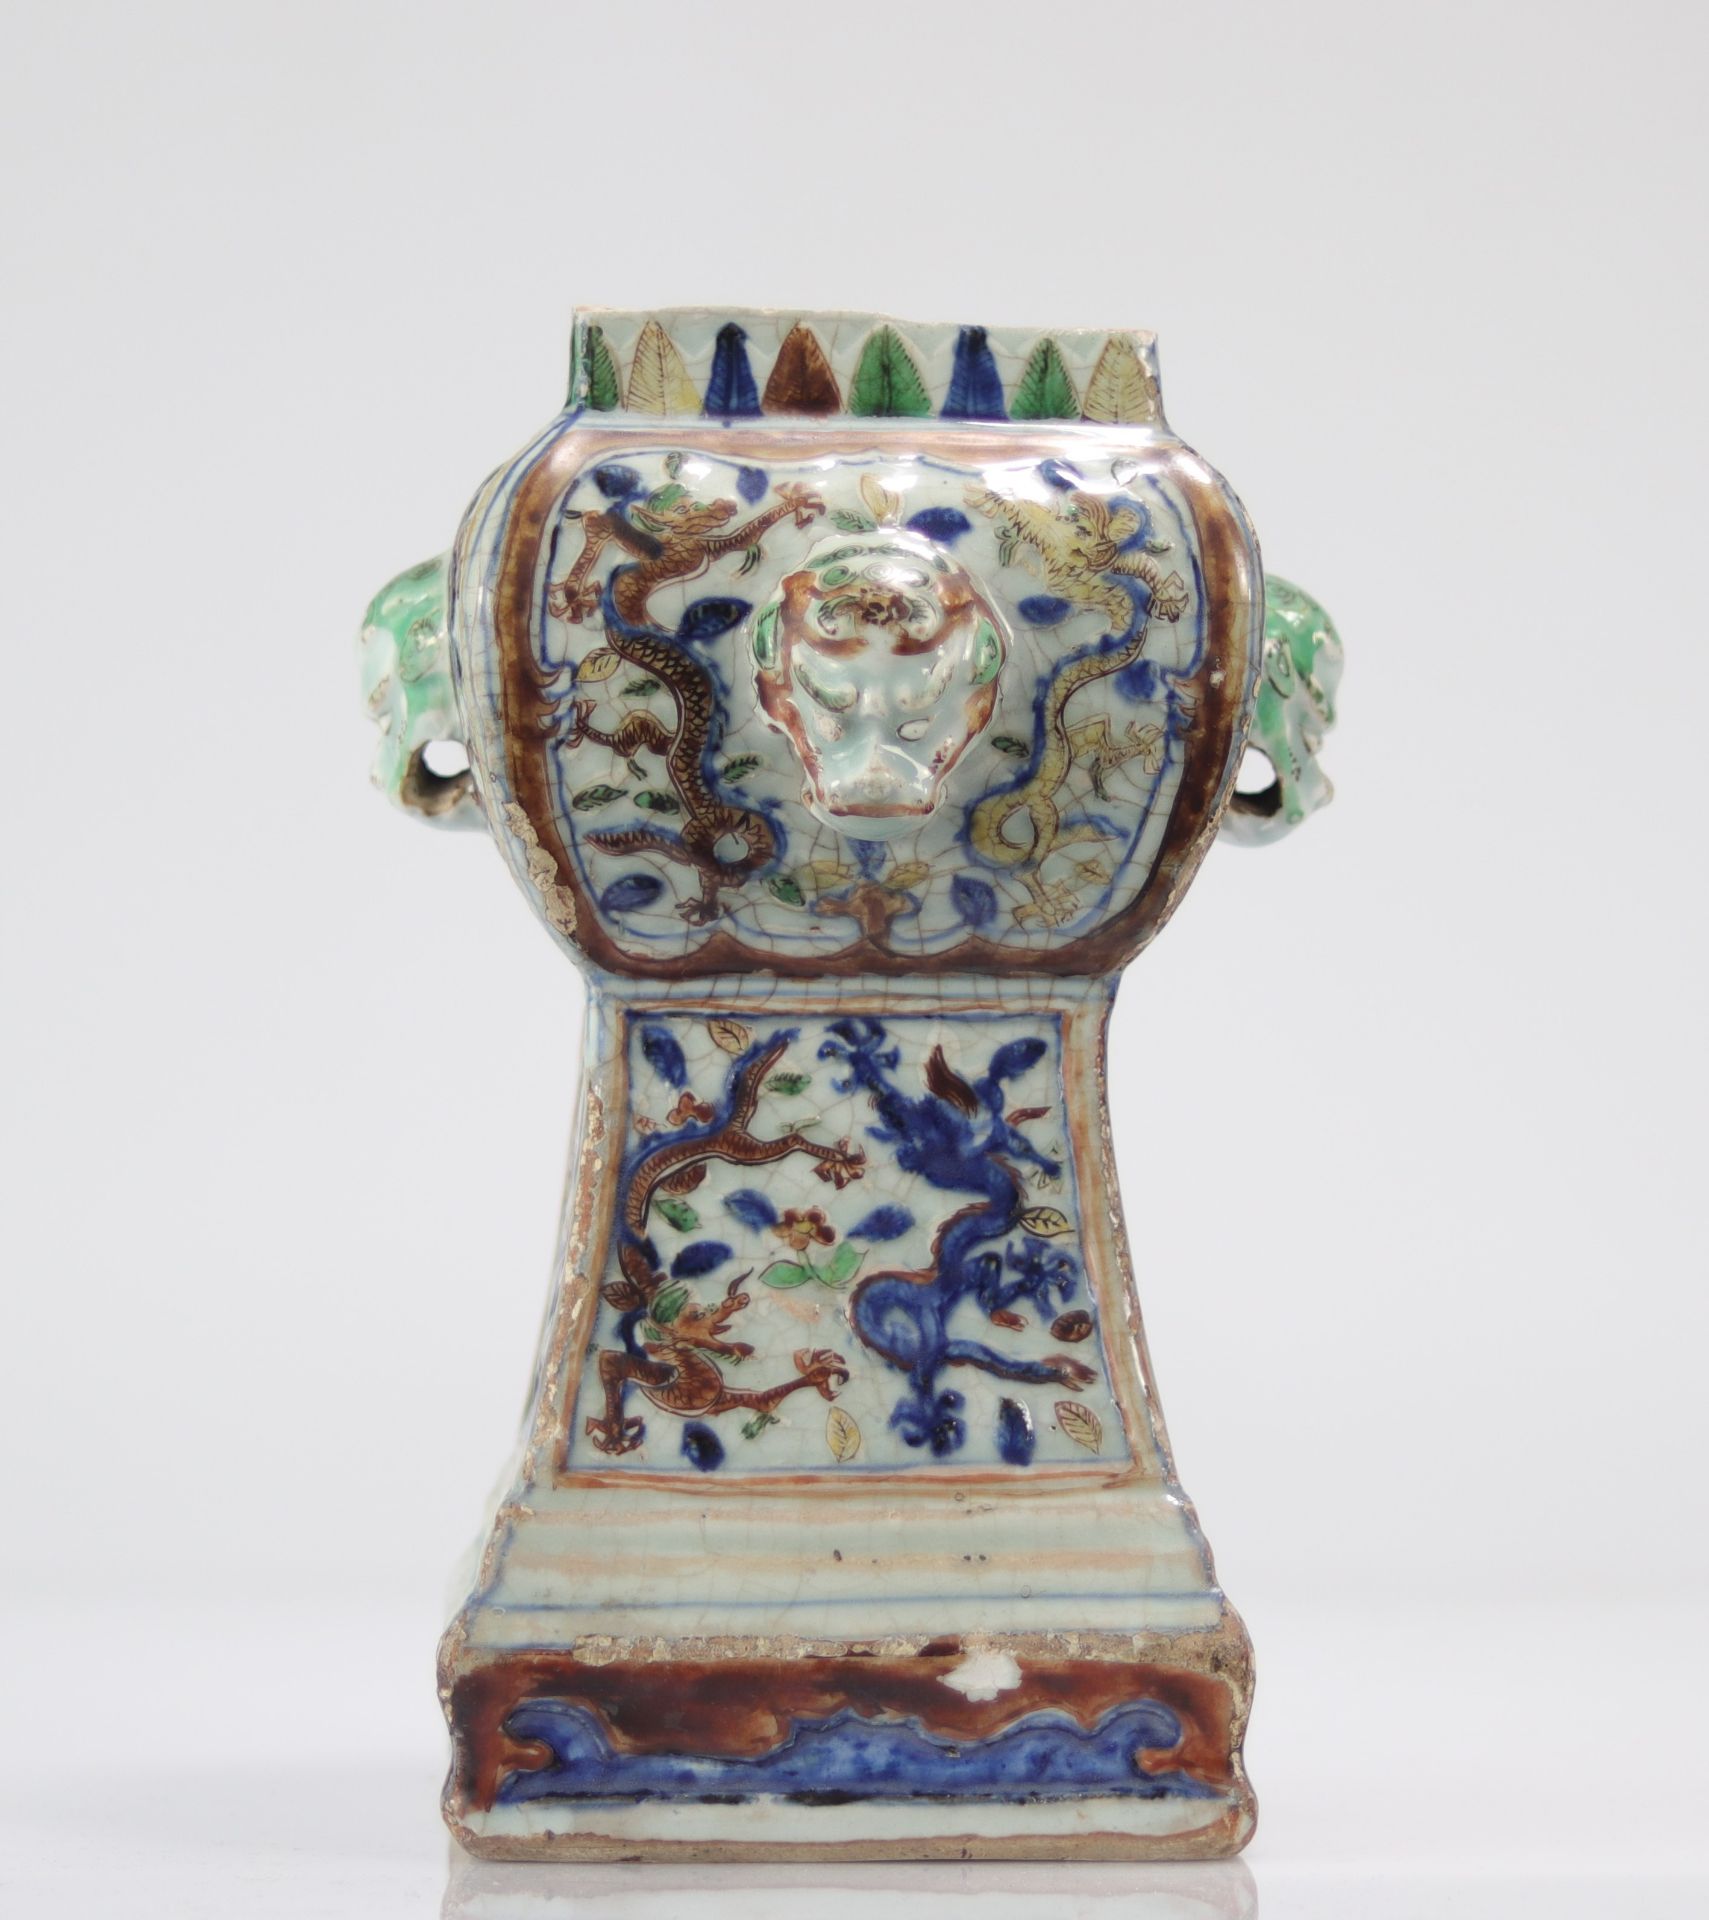 China Ming period vase with imperial dragon decoration